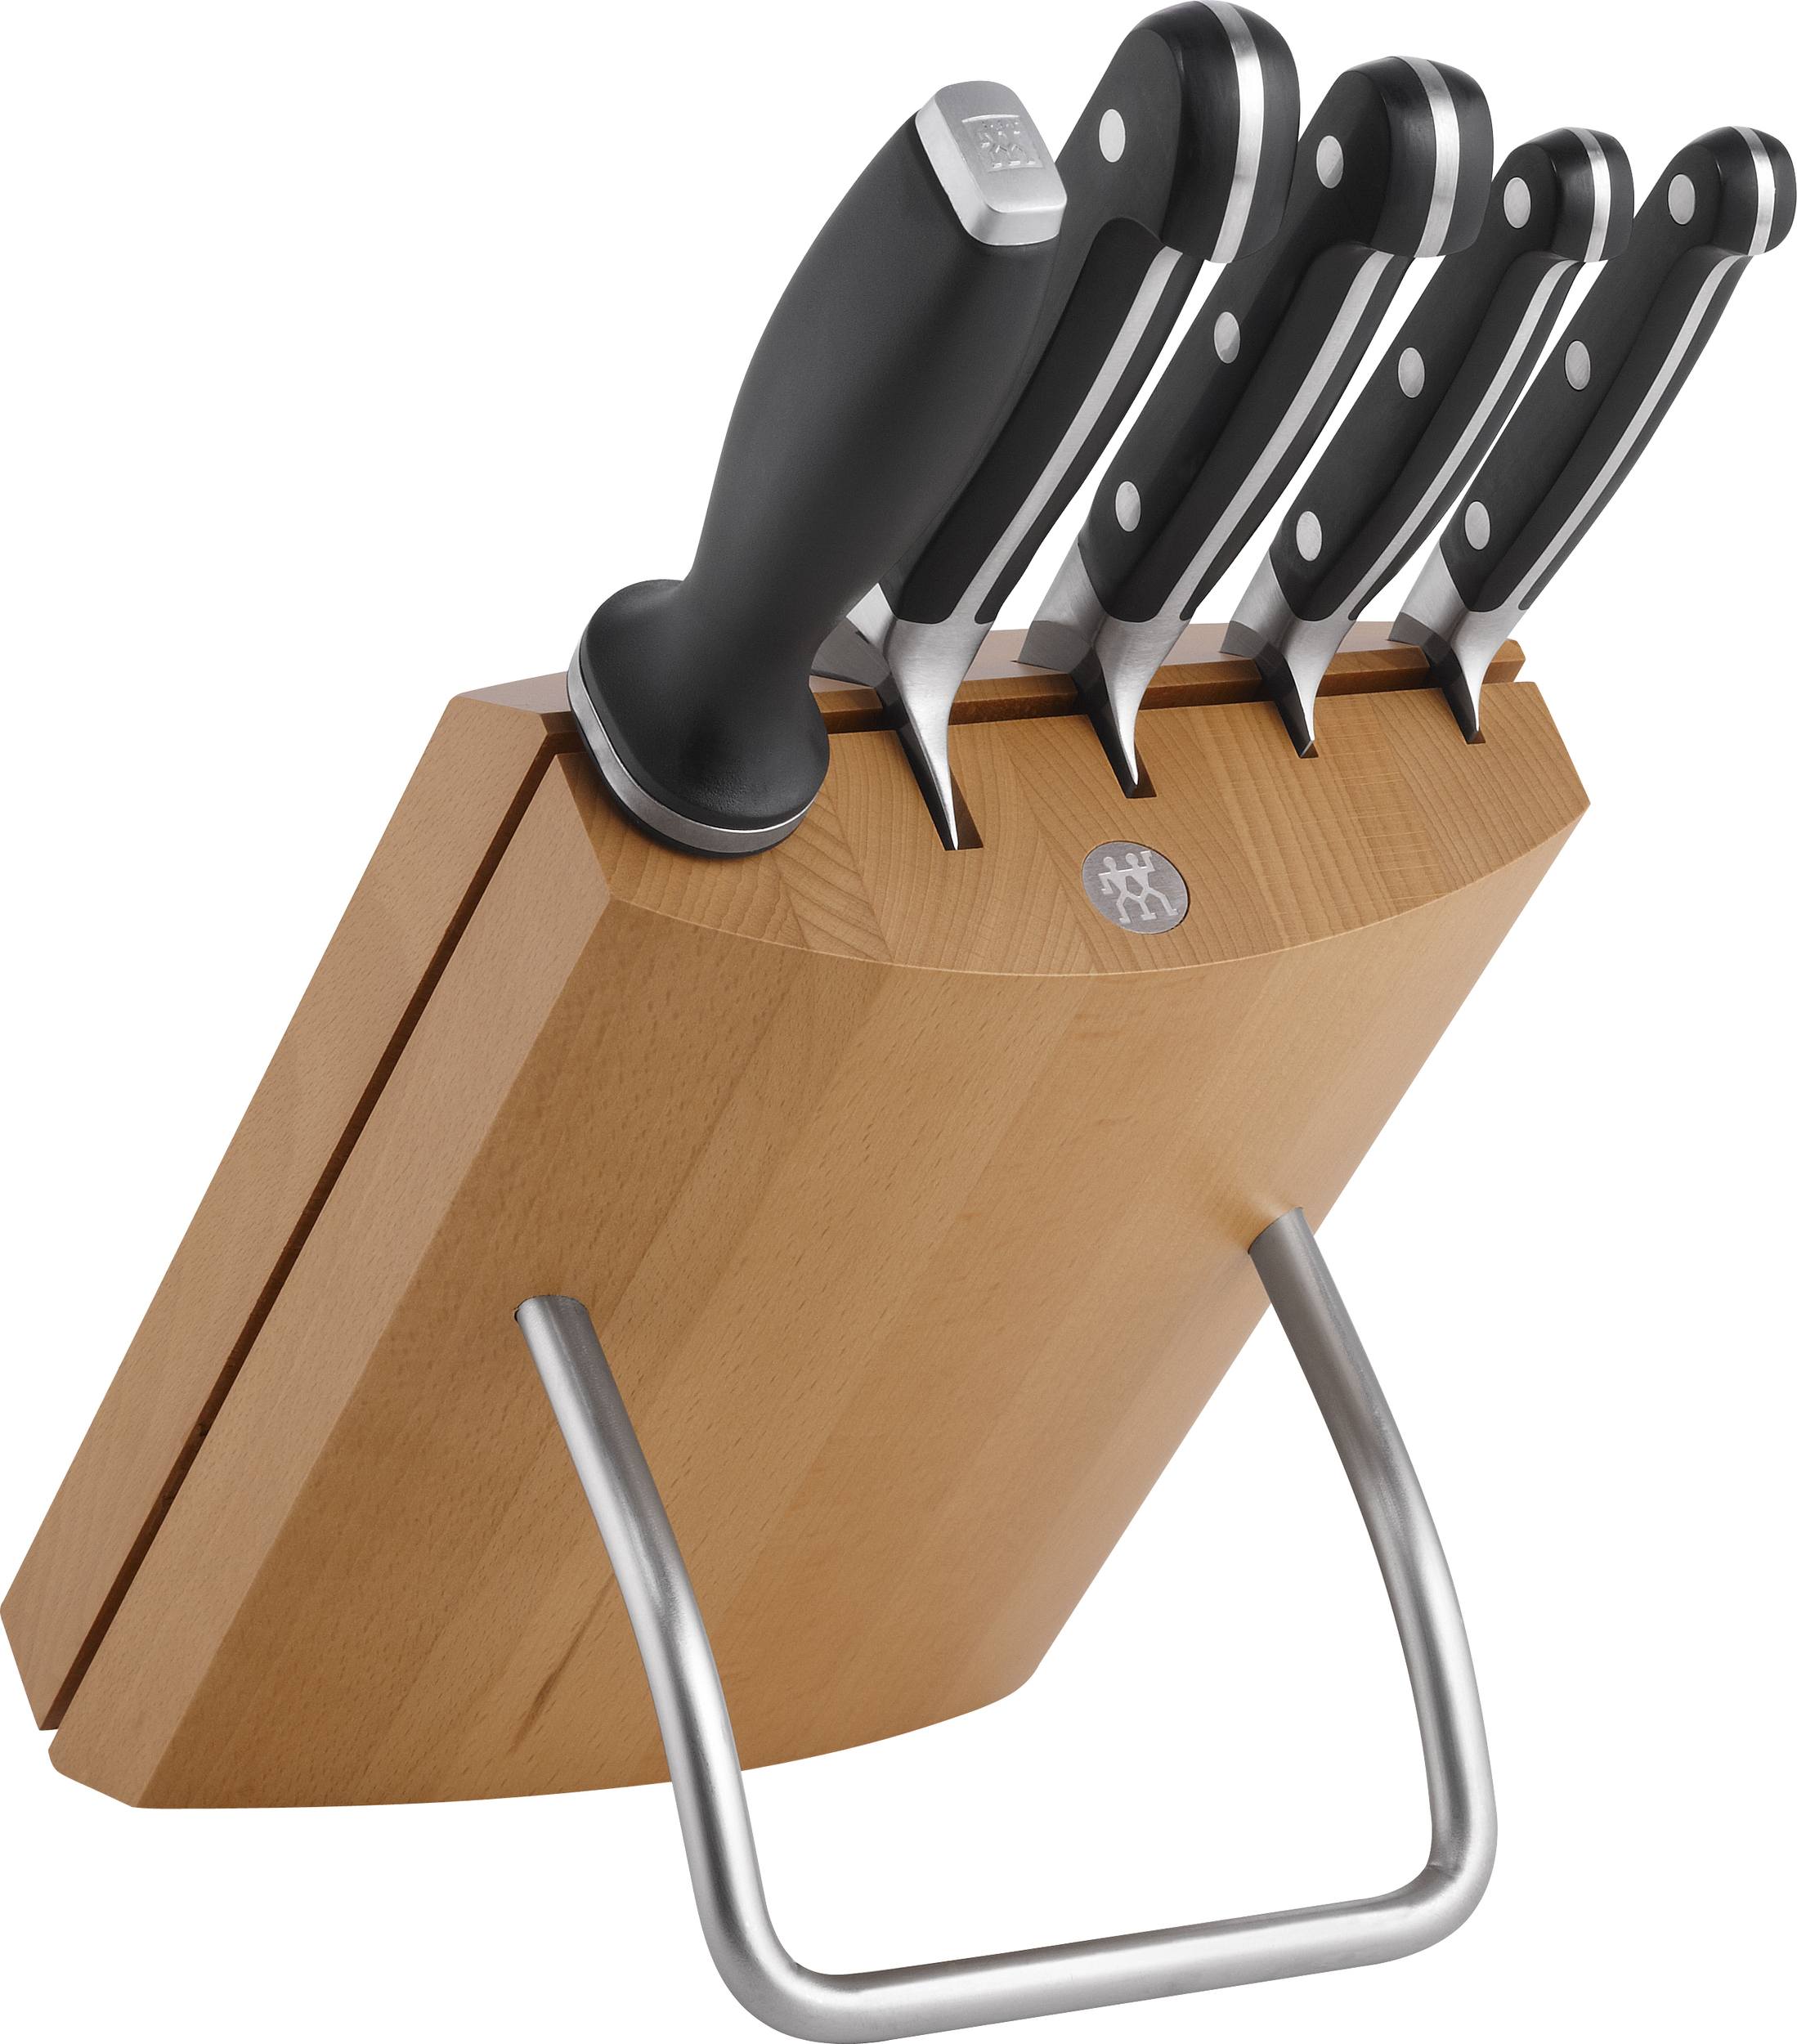 https://3fa-media.com/zwilling/zwilling-zwilling-pro-knife-block-with-four-knives-knife-sharpener-beechwood__107779_e7ccd2a-s2500x2500.jpg